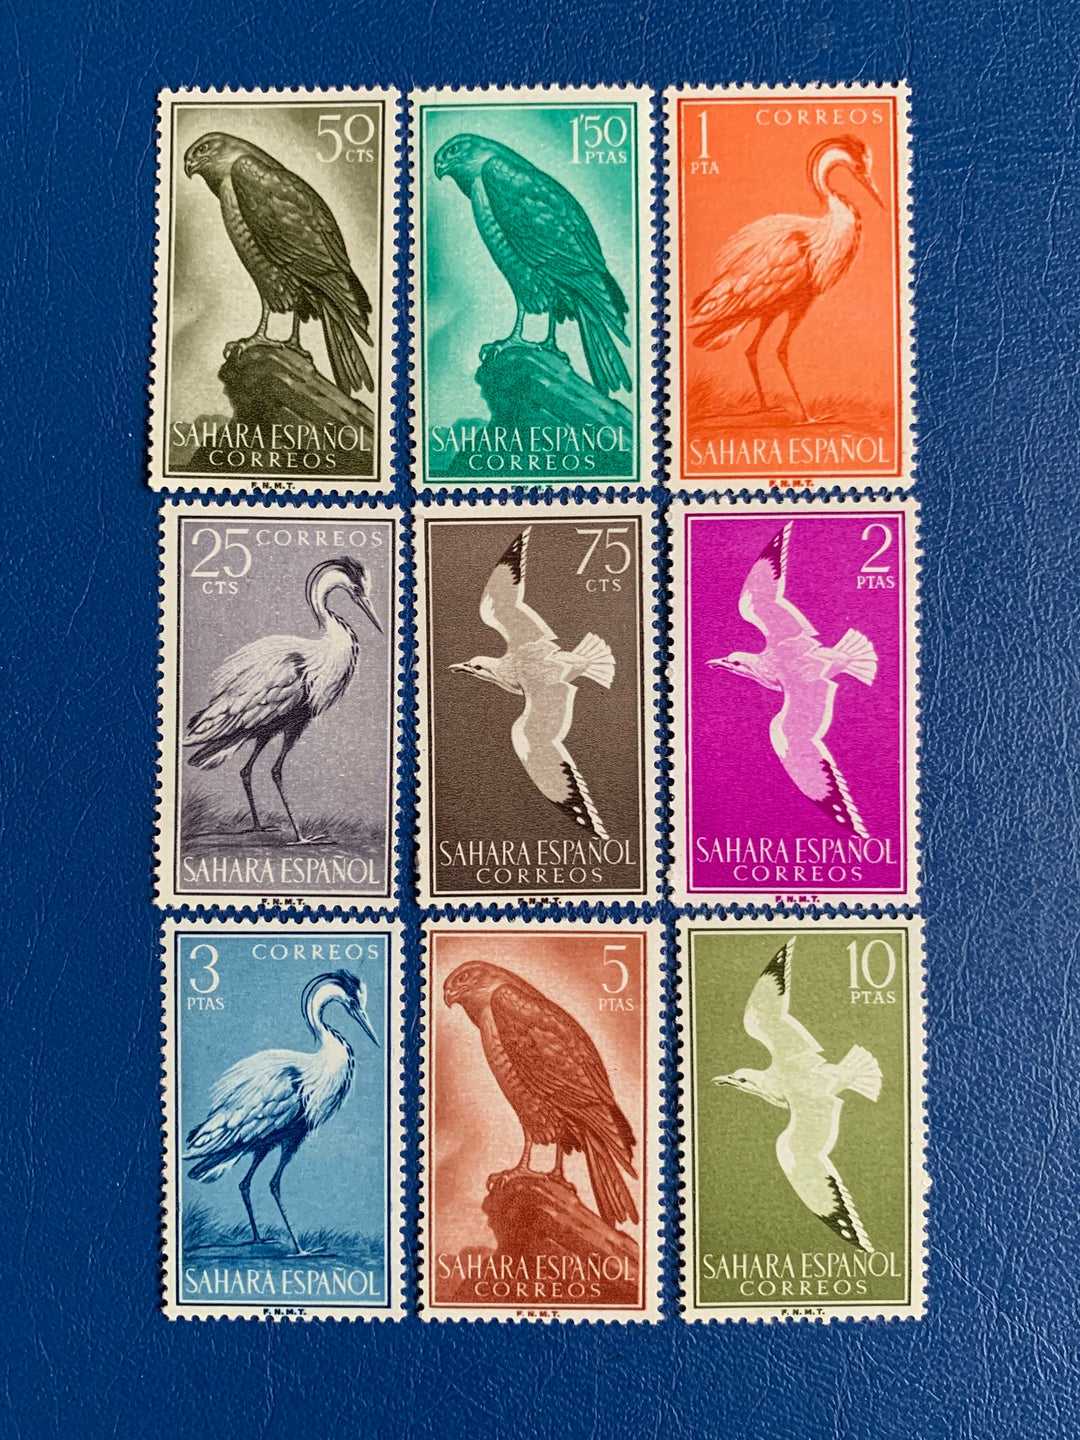 Sp. Sahara - Original Vintage Postage Stamps - 1965 - Stamp Day - 25 Years of Peace - for the collector, artist or crafter